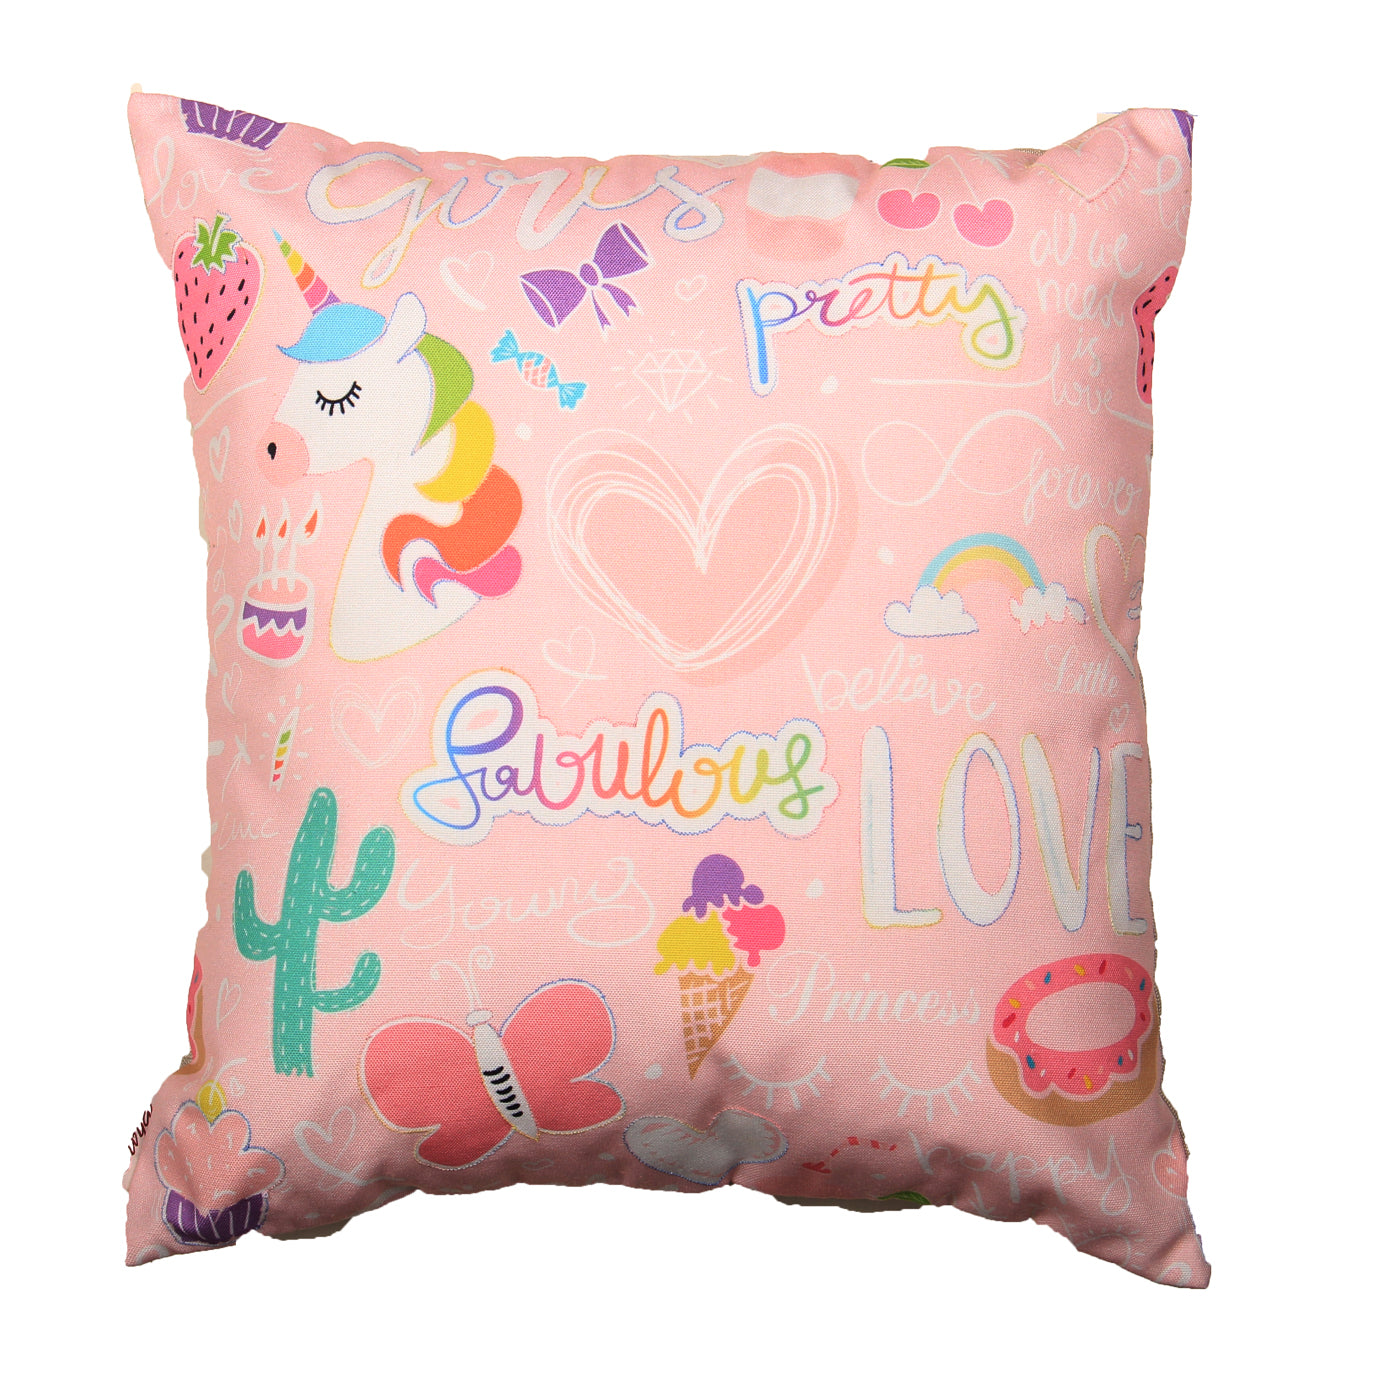 Blossom Bliss 16x16 Inch Light Pink Digital Printed Polyduck Cushion Cover